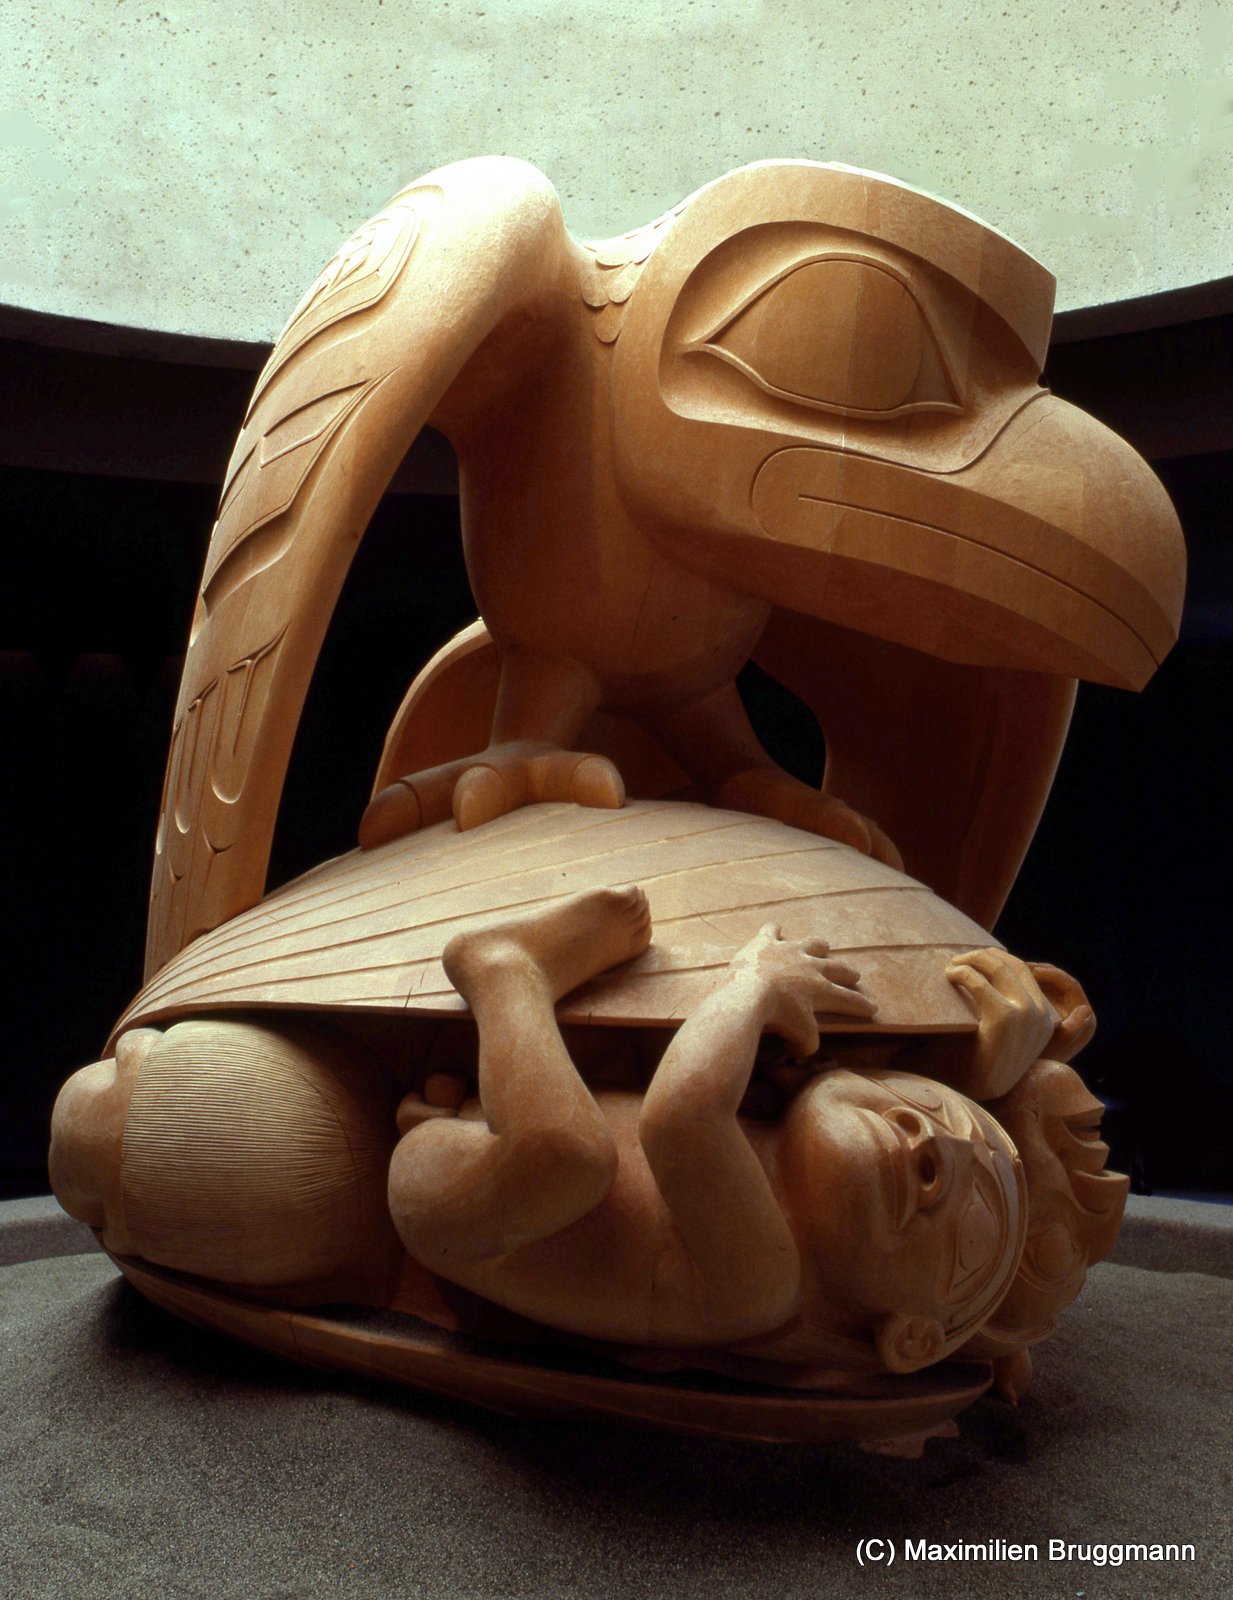 The Haida myth finds its most beautiful visual expression in this 2m- (6.6 feet) high sculpture in white cedar created by artist Bill Reid for the Museum of Anthropology in Vancouver. Dedication festivities for this masterpiece were held in 1980.